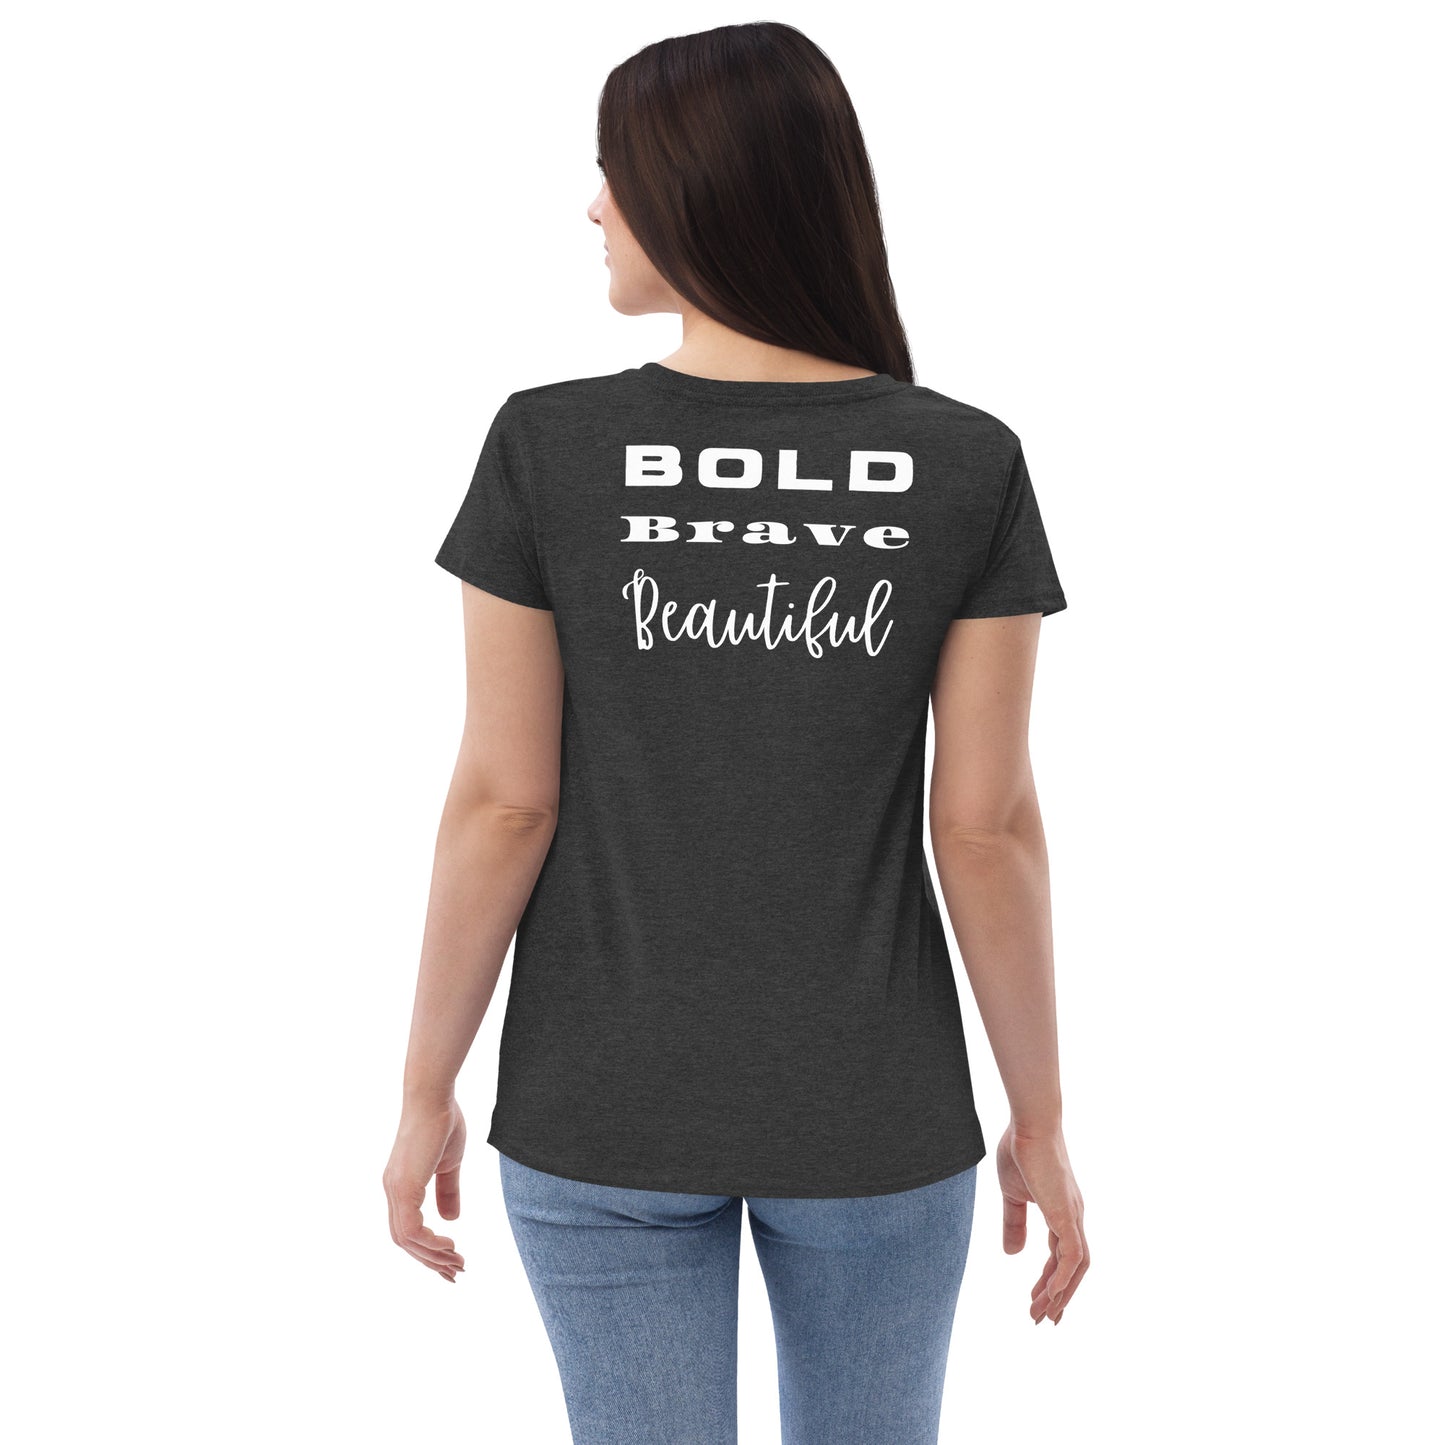 Bold, Brave, Beautiful - Women’s recycled v-neck t-shirt